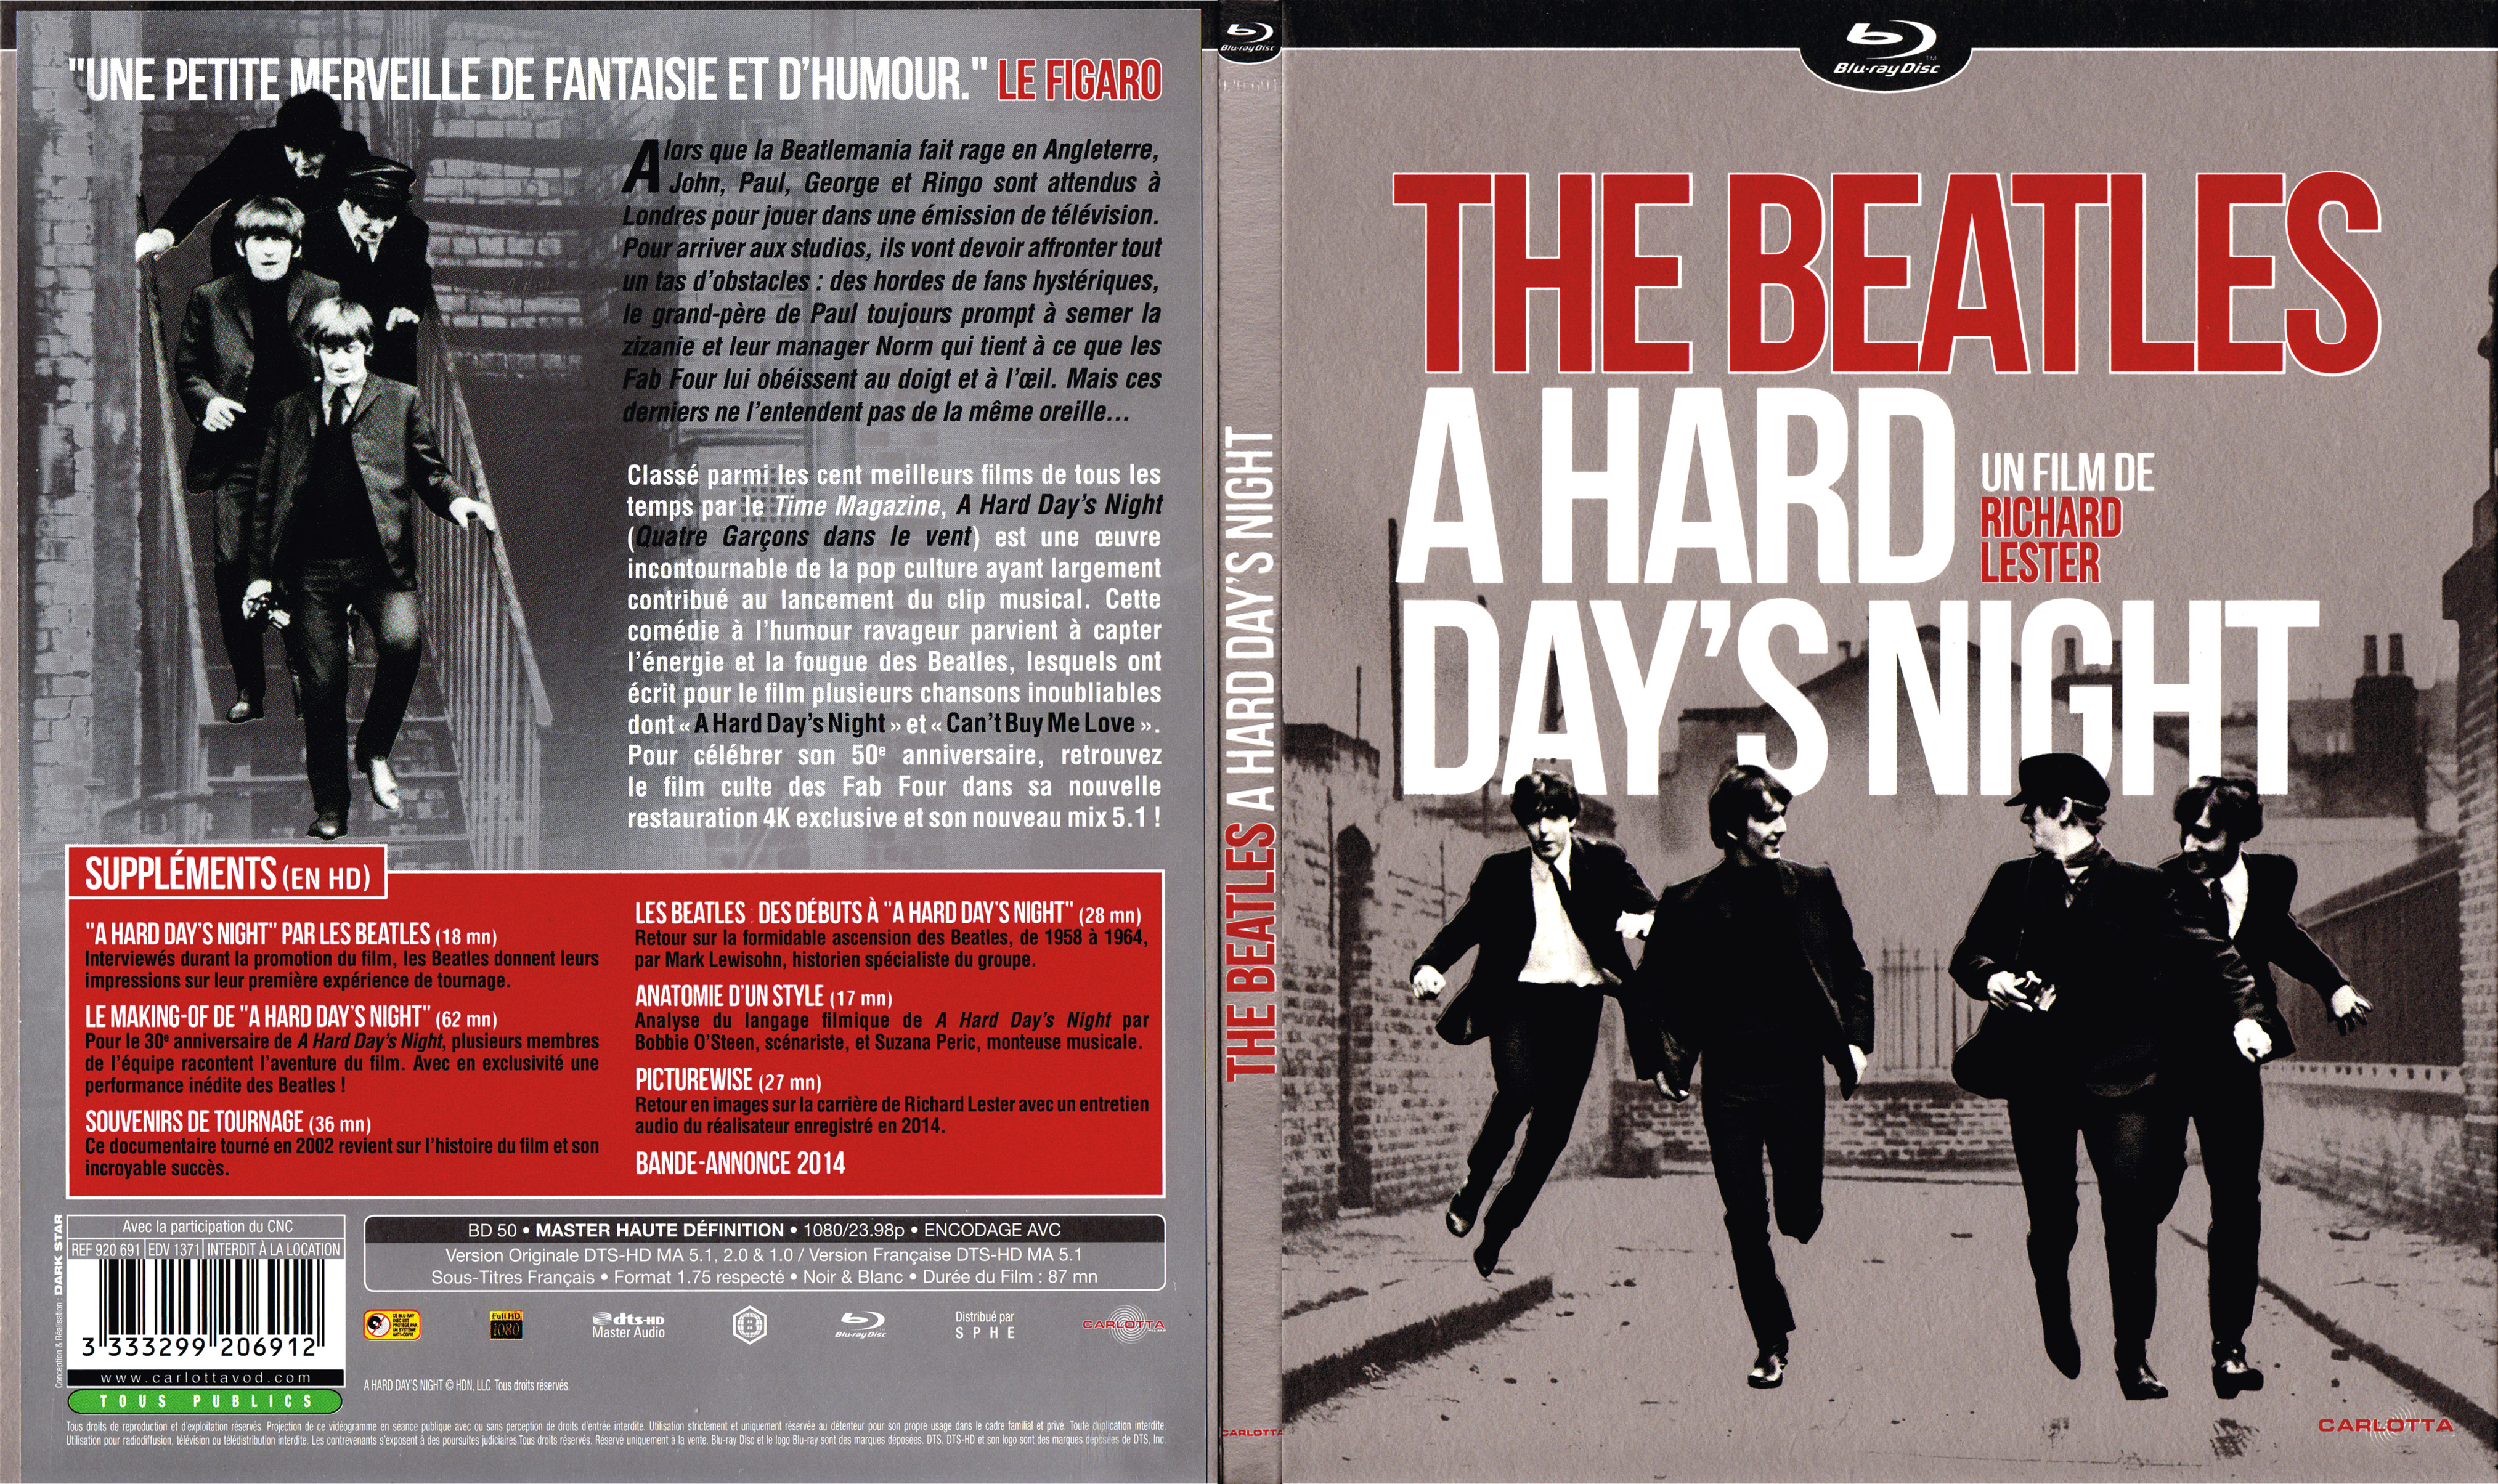 Jaquette DVD The Beatles a hard day